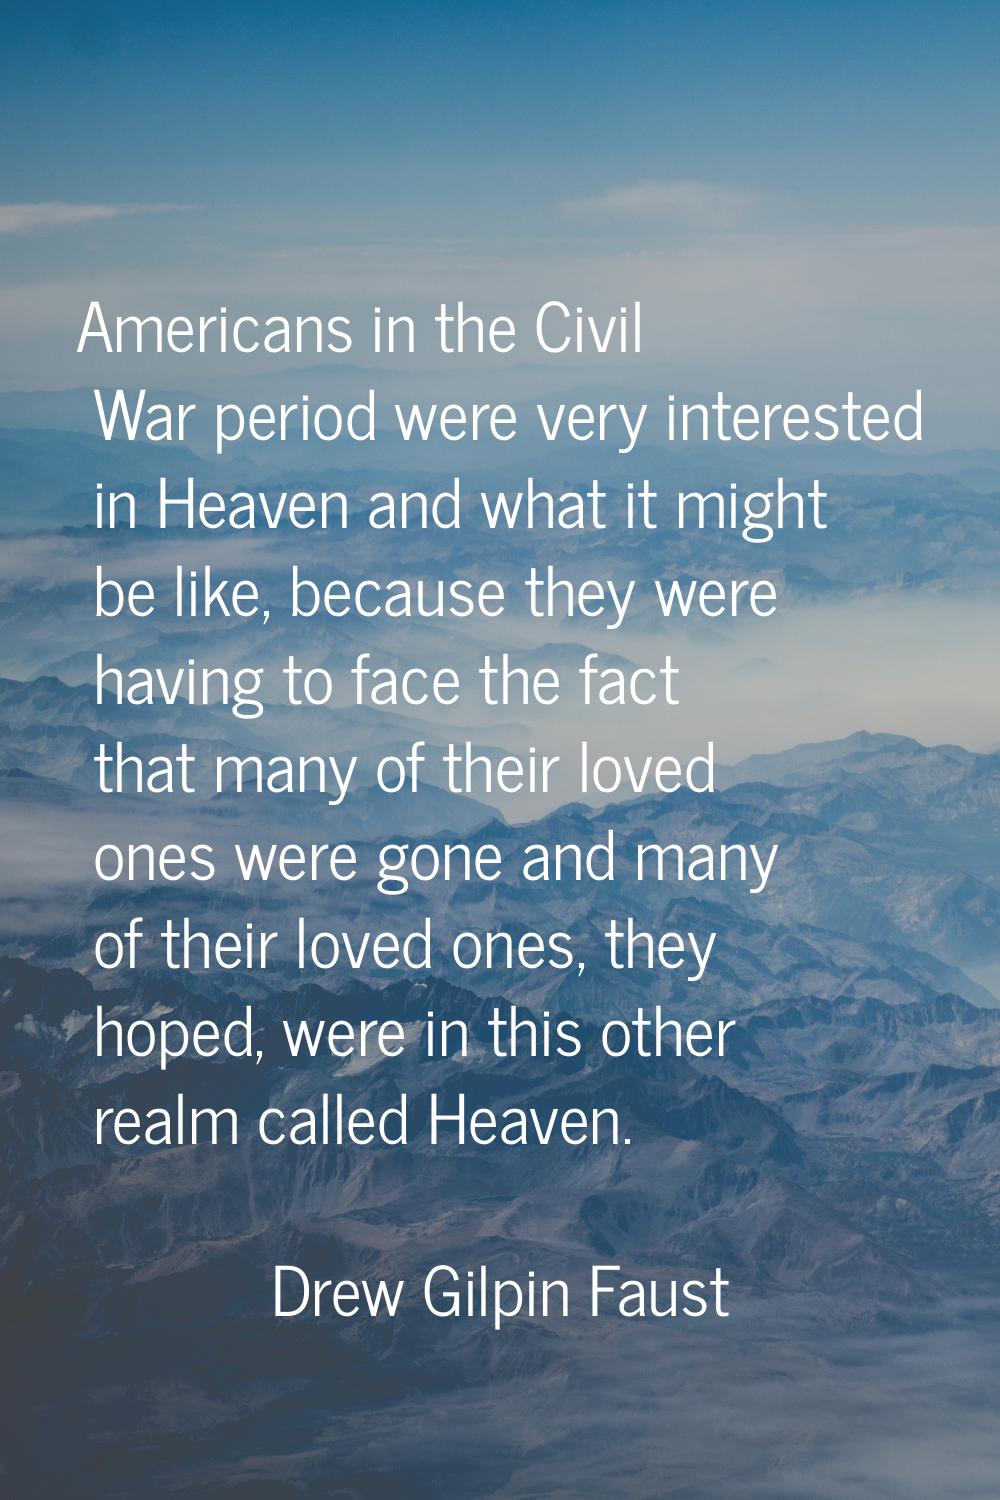 Americans in the Civil War period were very interested in Heaven and what it might be like, because